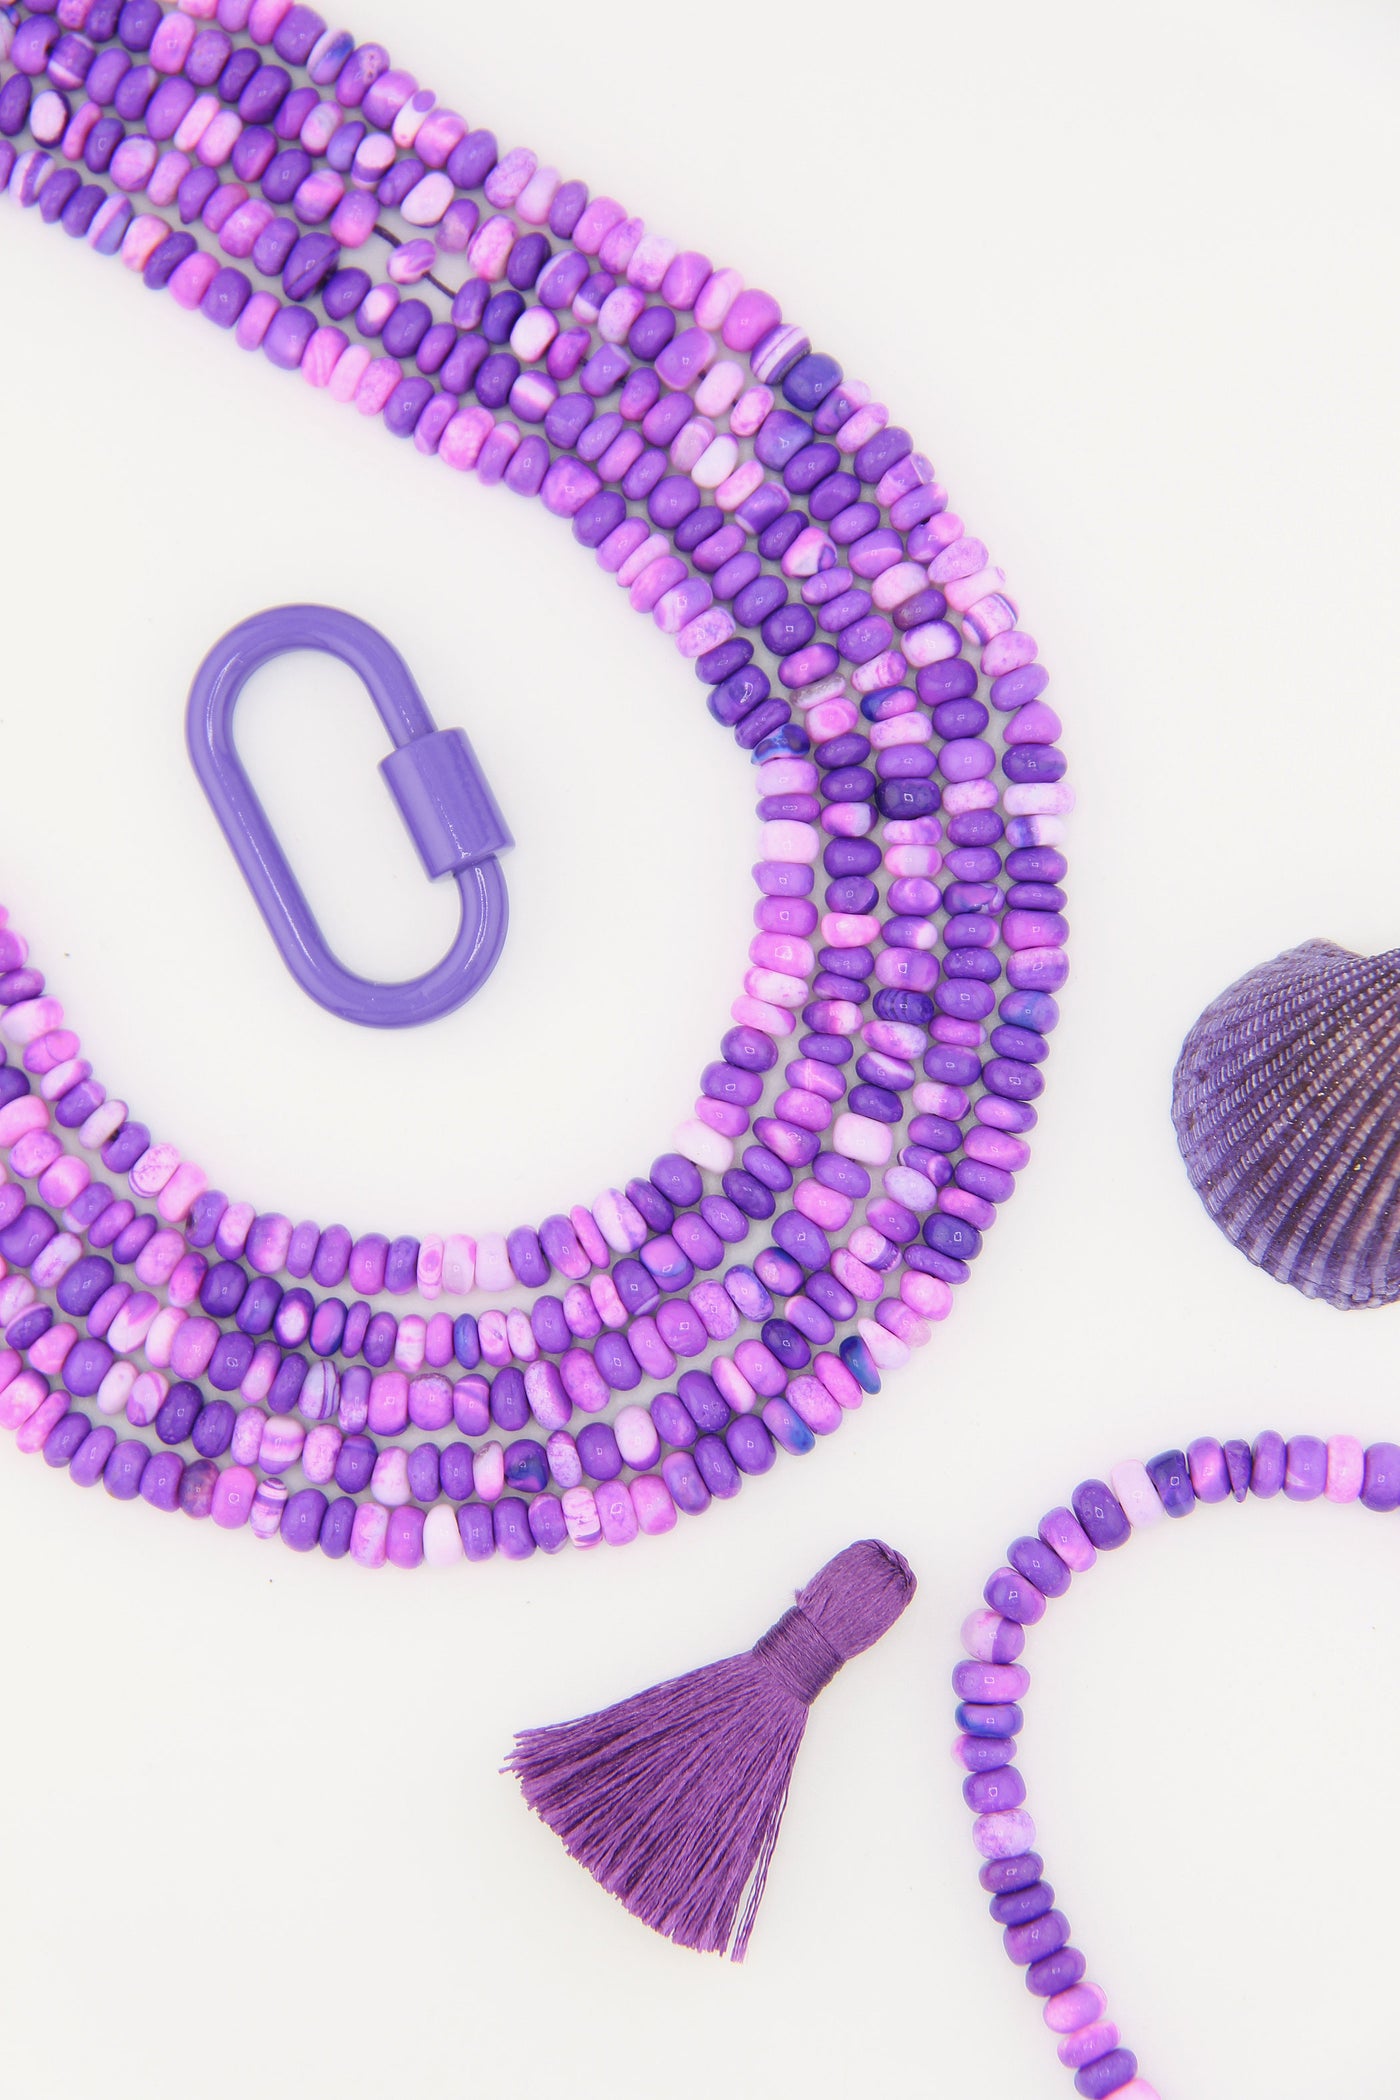 Purple Opal Smooth Rondelle Beads, 5-6mm AA Quality